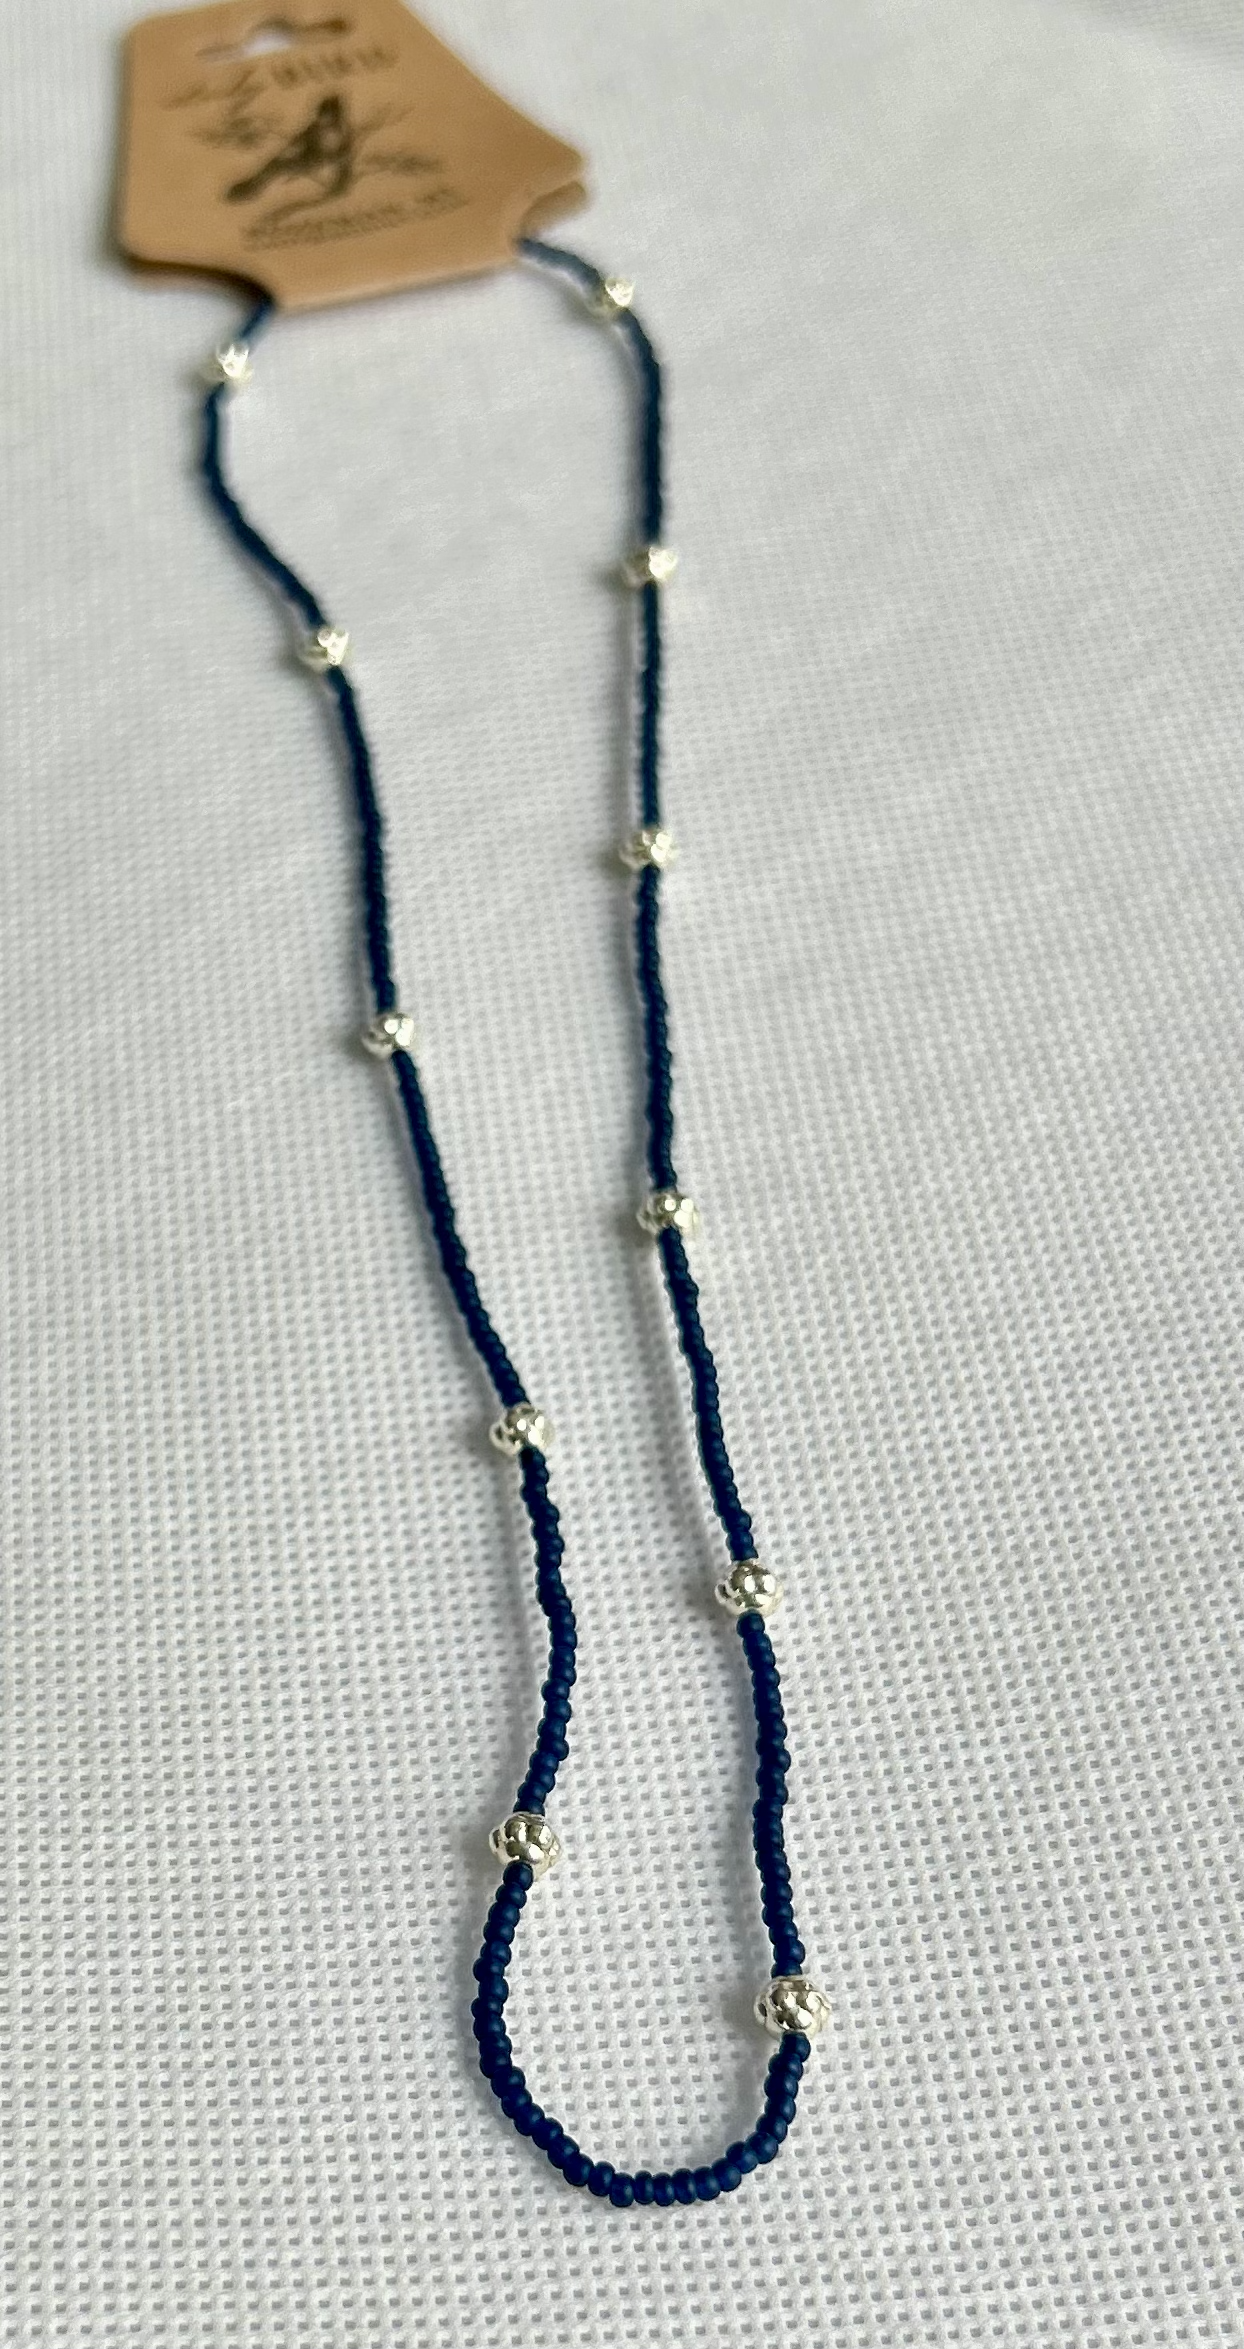 Navy Blue Seed Bead Stretchy Necklace with Chunky Silver Beads